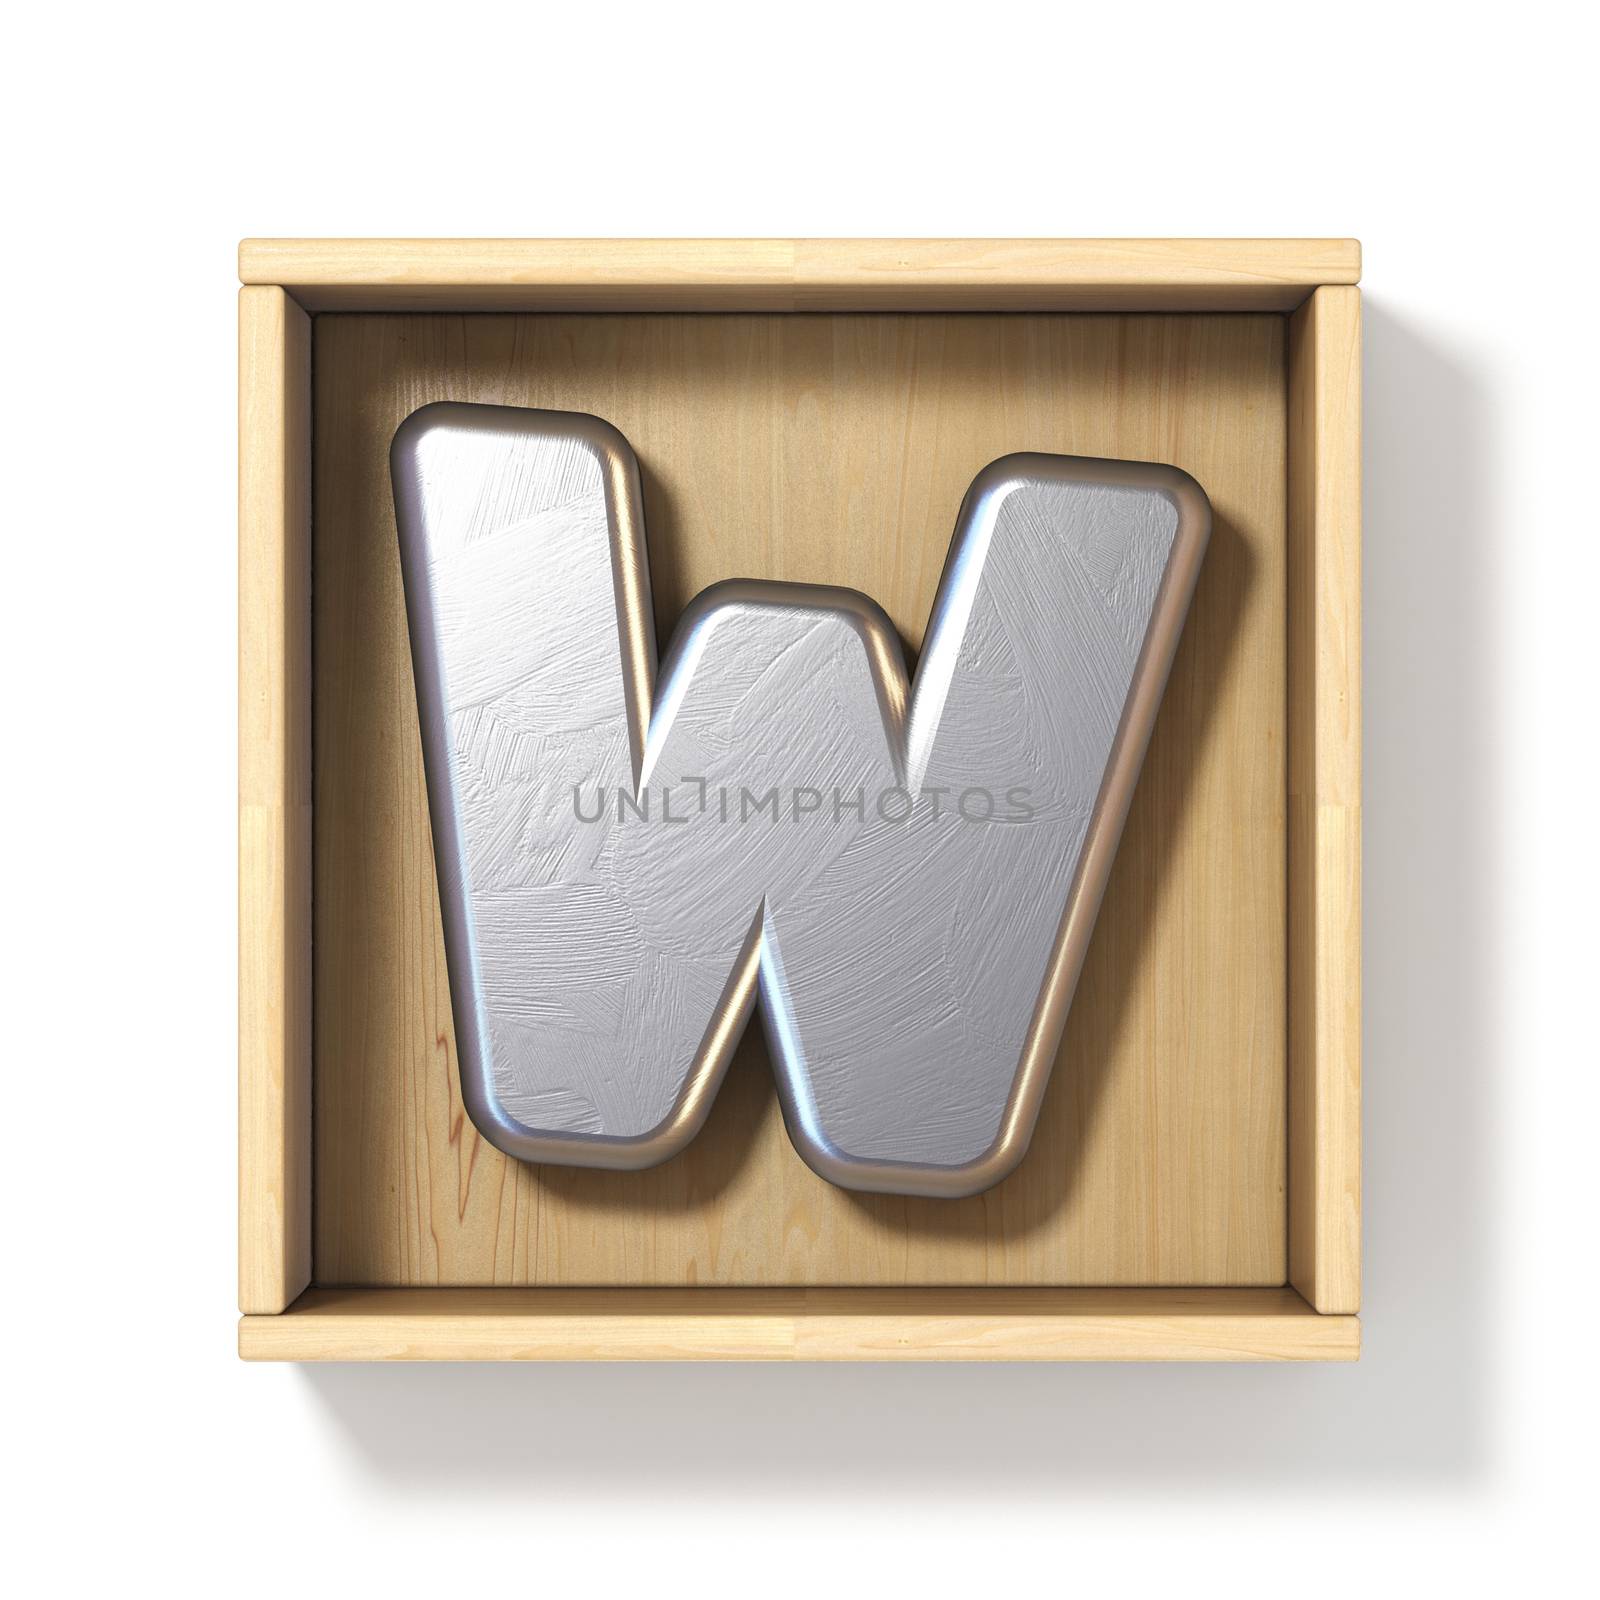 Silver metal letter W in wooden box 3D render illustration isolated on white background